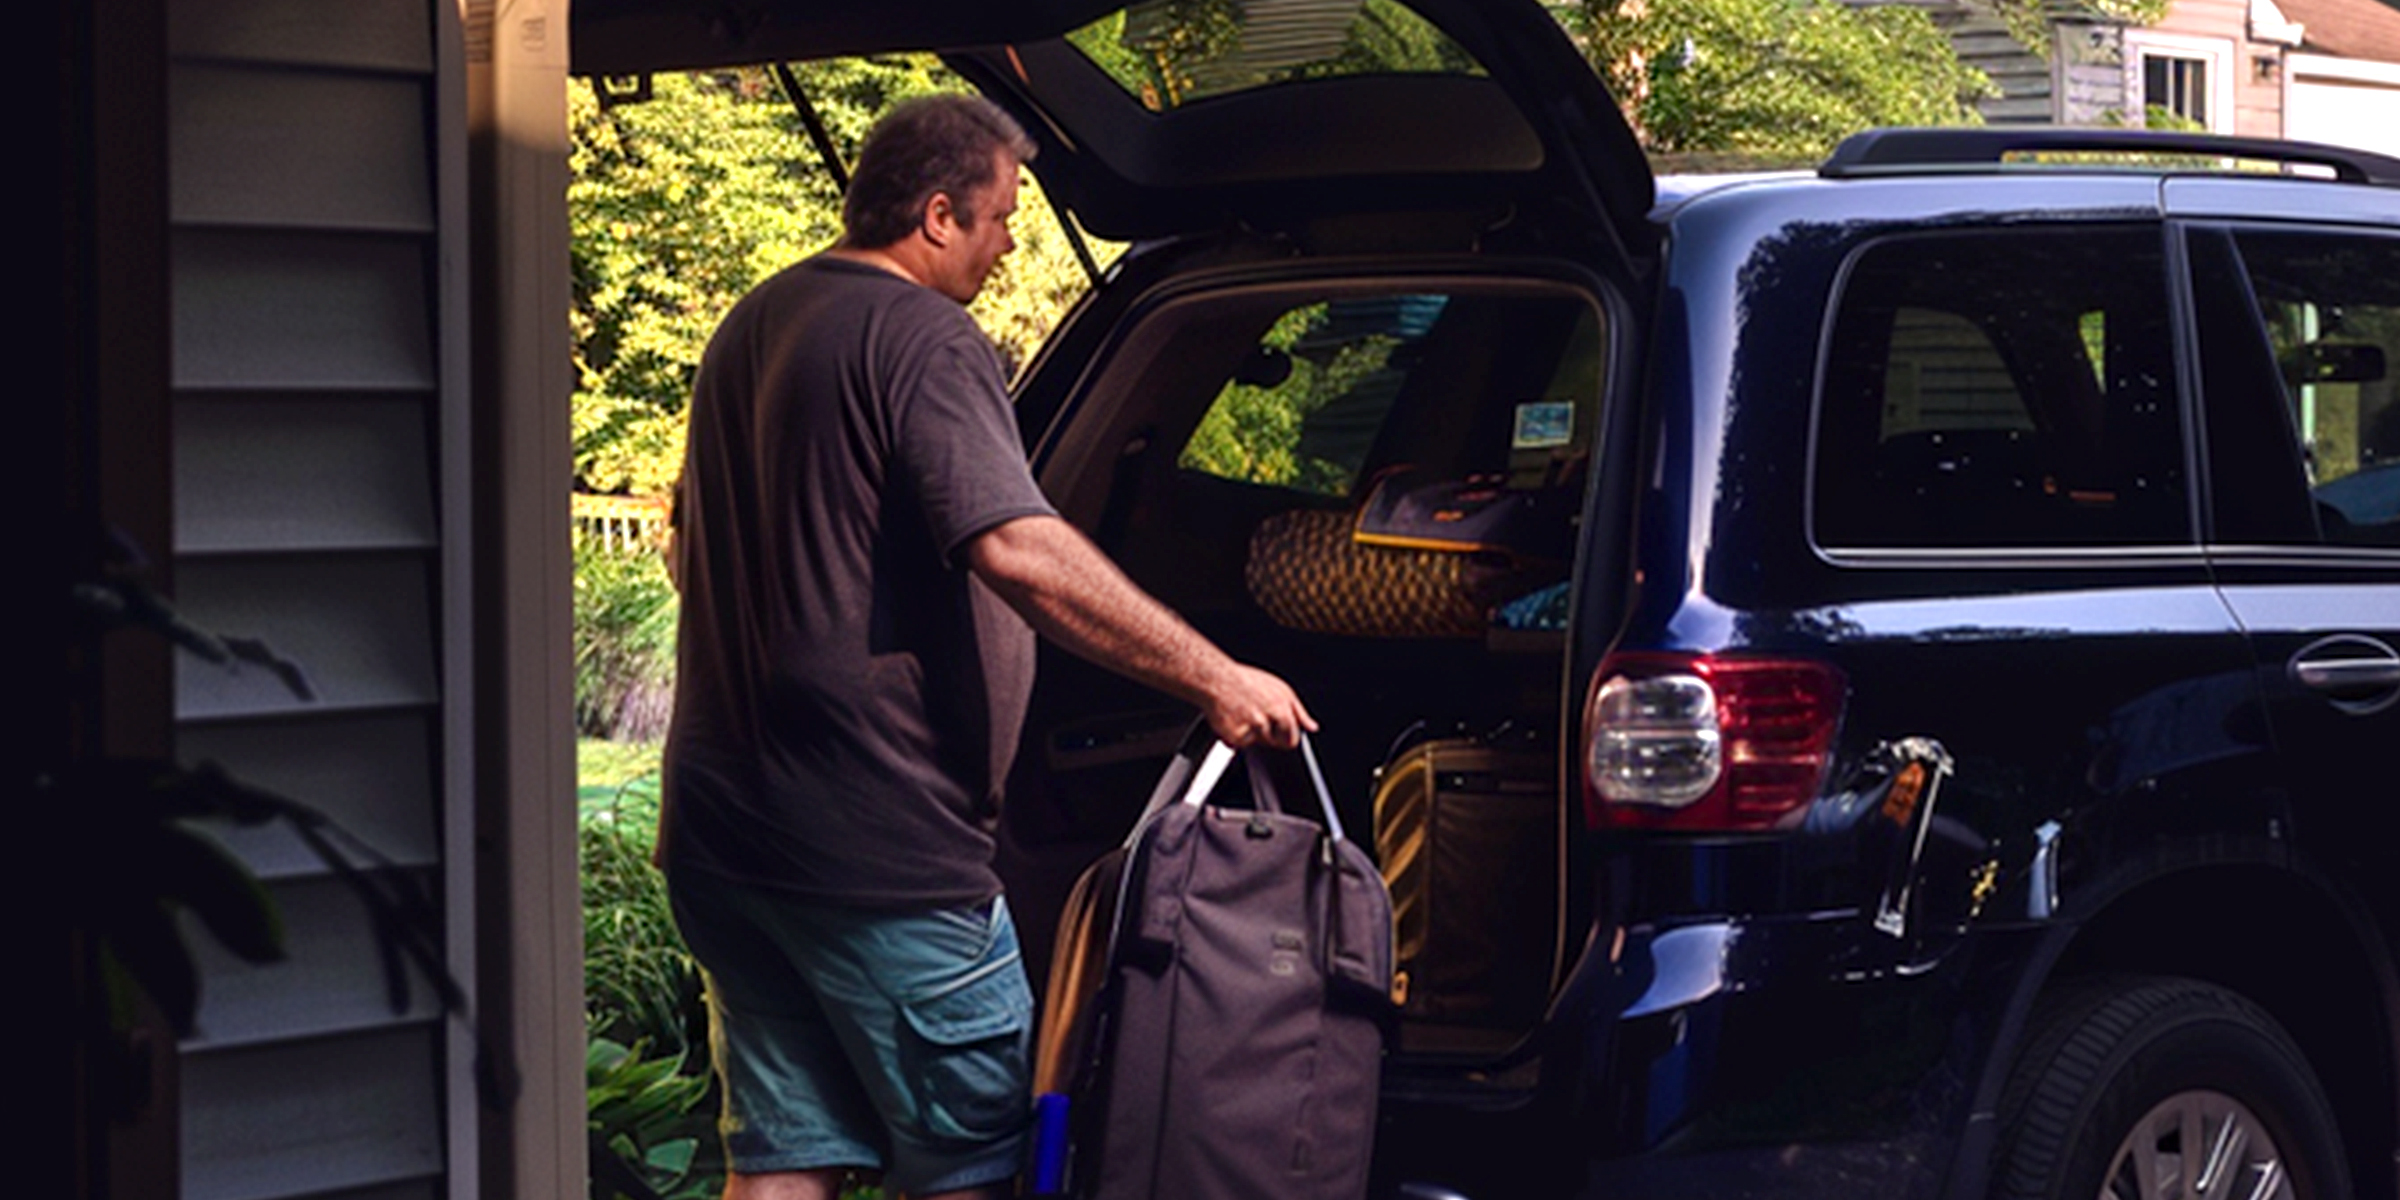 A man loading things into his car trunk | Source: AmoMama